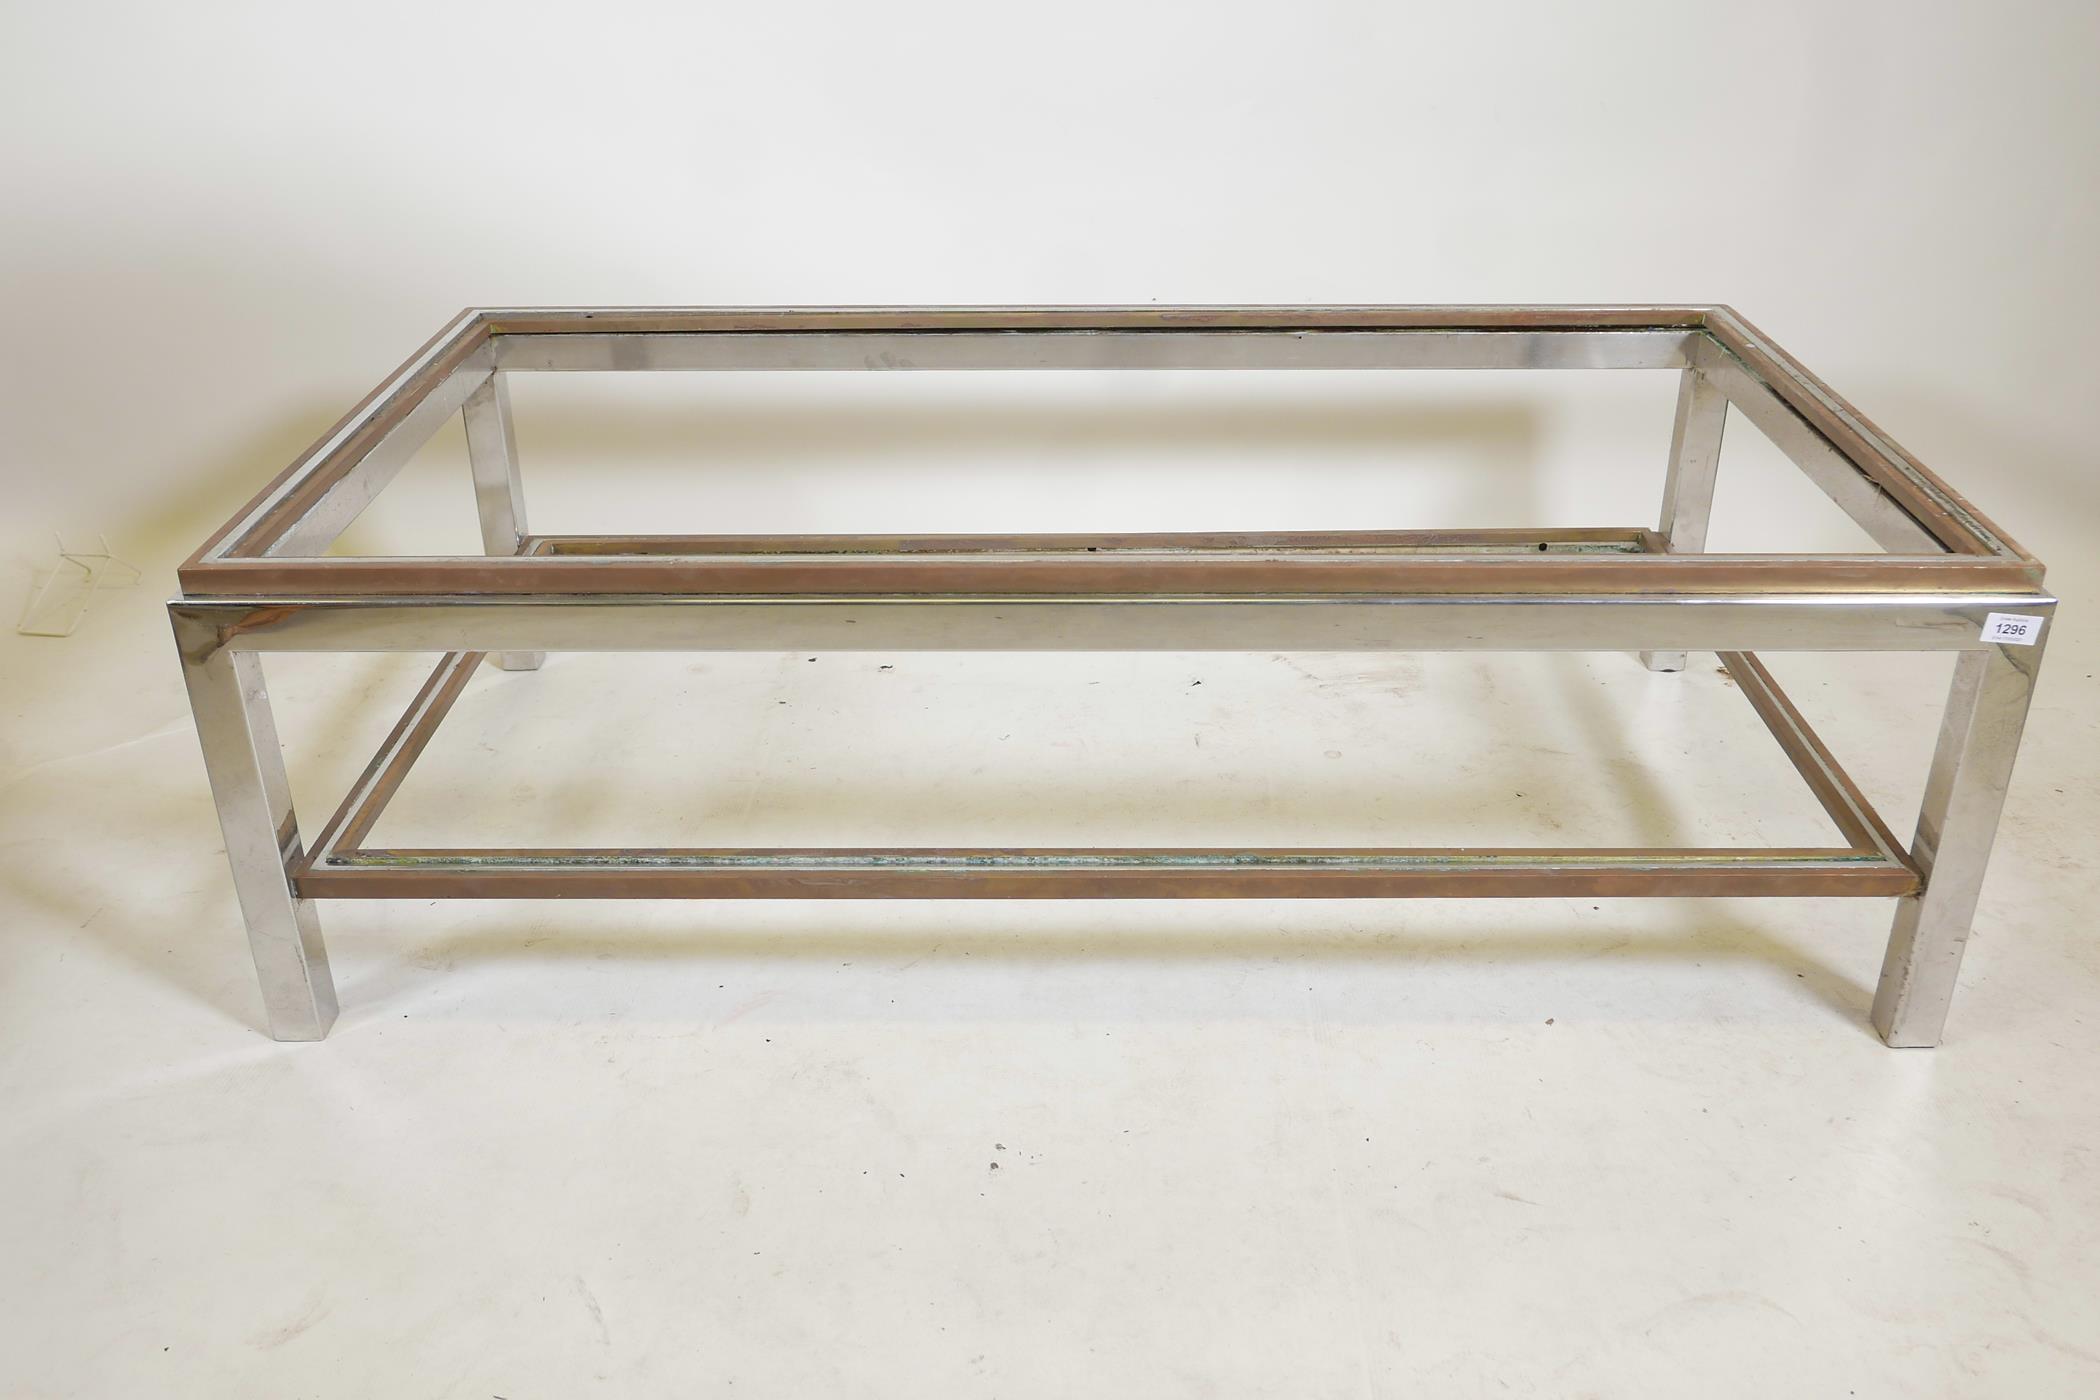 A chrome and brass two tier coffee table in the style of Zevi, 51" x 27½" x 16", A/F lacks glass